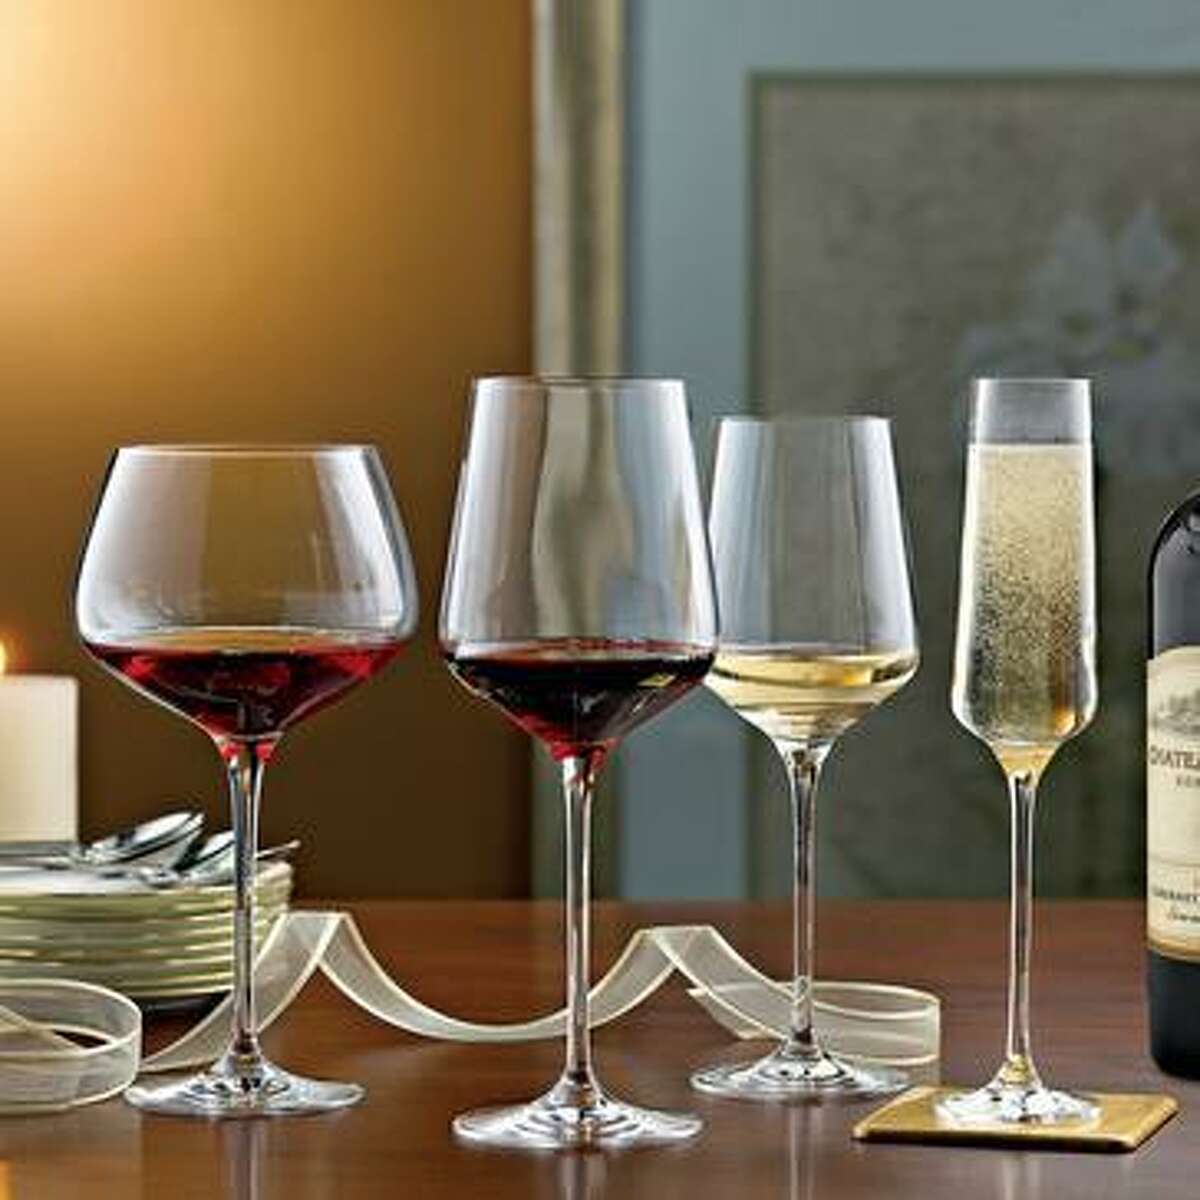 Enhance your wine lover’s enjoyment with a special Christmas present of specialized wine glasses for Chardonnay, Cabernet Sauvignon, Pinot Noir, sparkling wines and more.